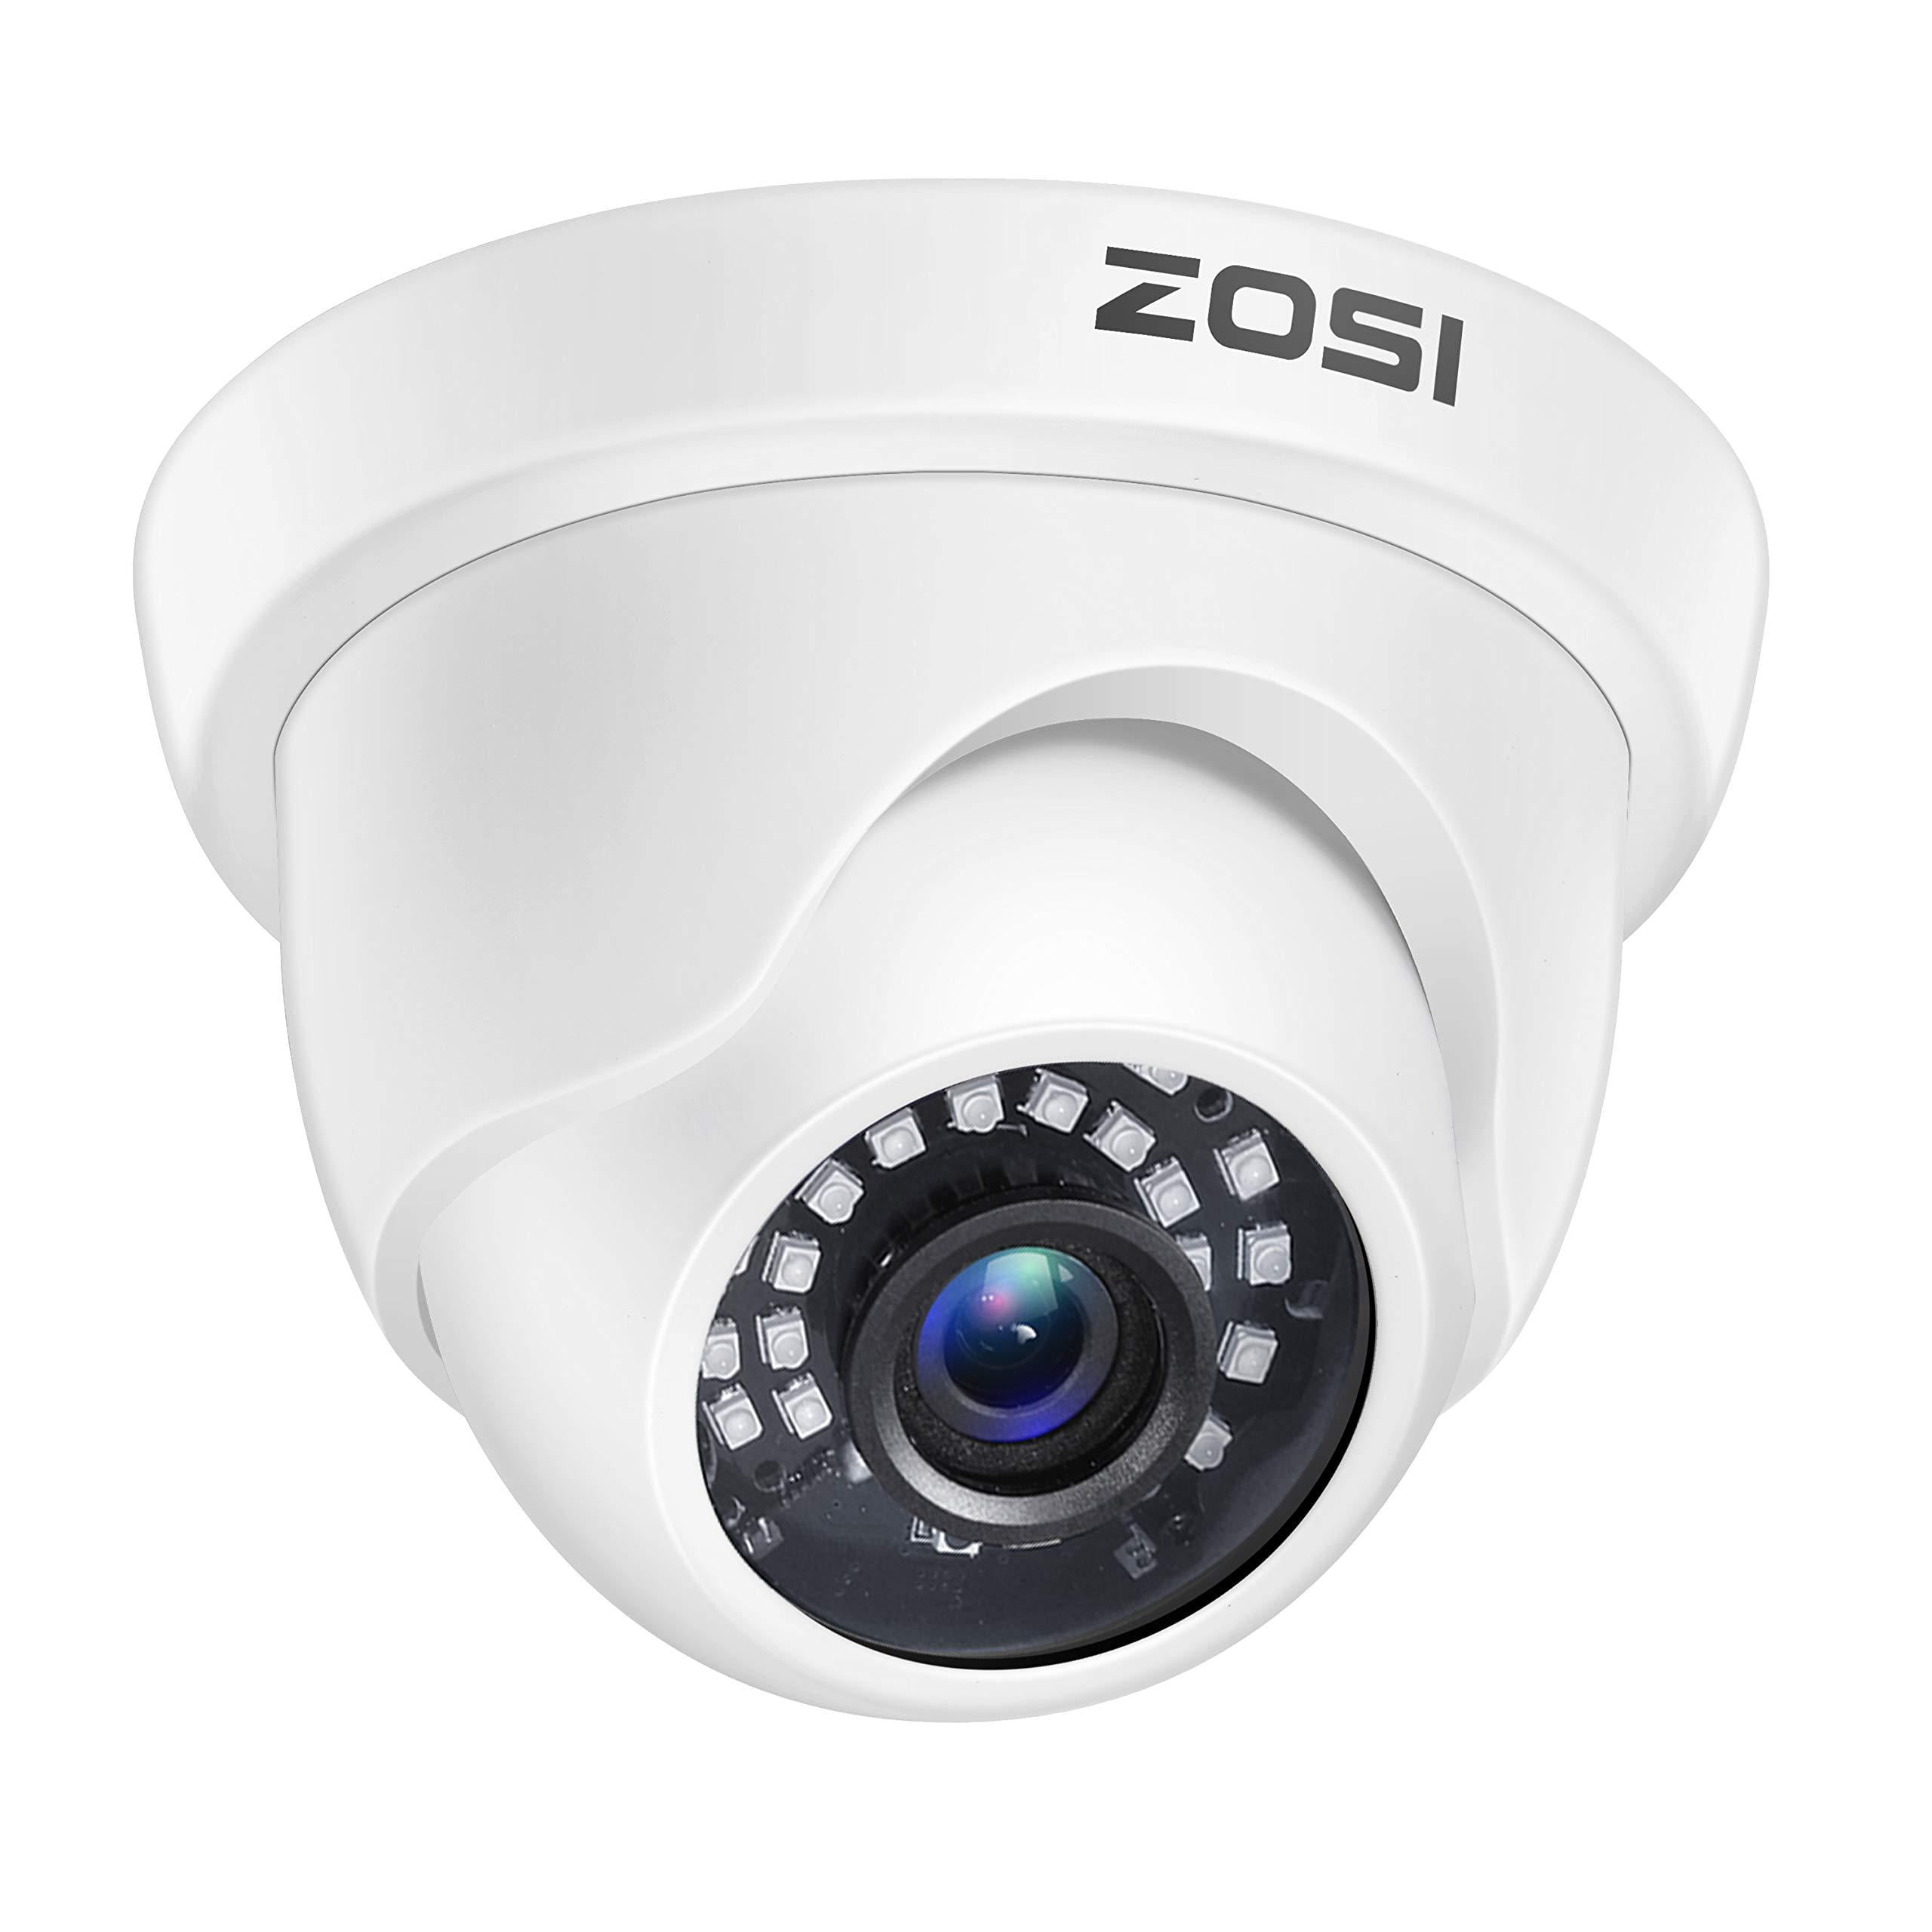 ZOSI 4PK 720p 4in1 Outdoor CCTV Security Camera 3.6mm Lens 65ft Day Night Vision 